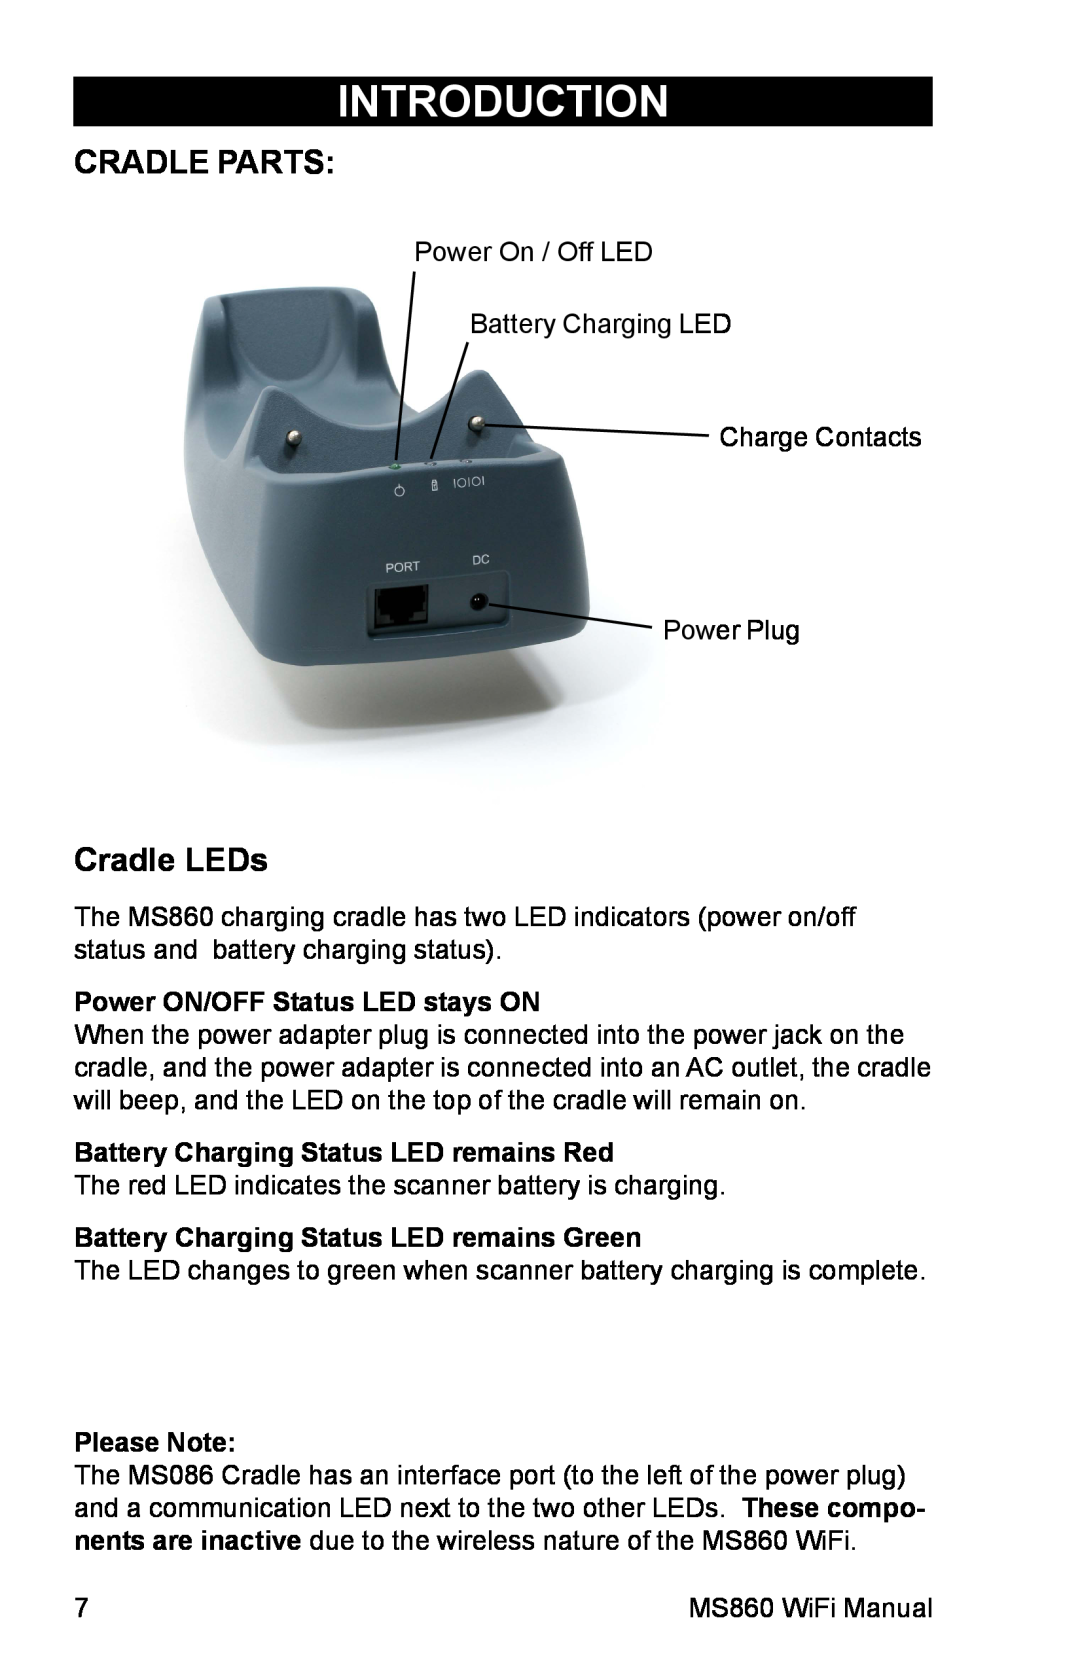 Unitech MS860 manual Cradle Parts, Cradle LEDs, Introduction, Power ON/OFF Status LED stays ON, Please Note 